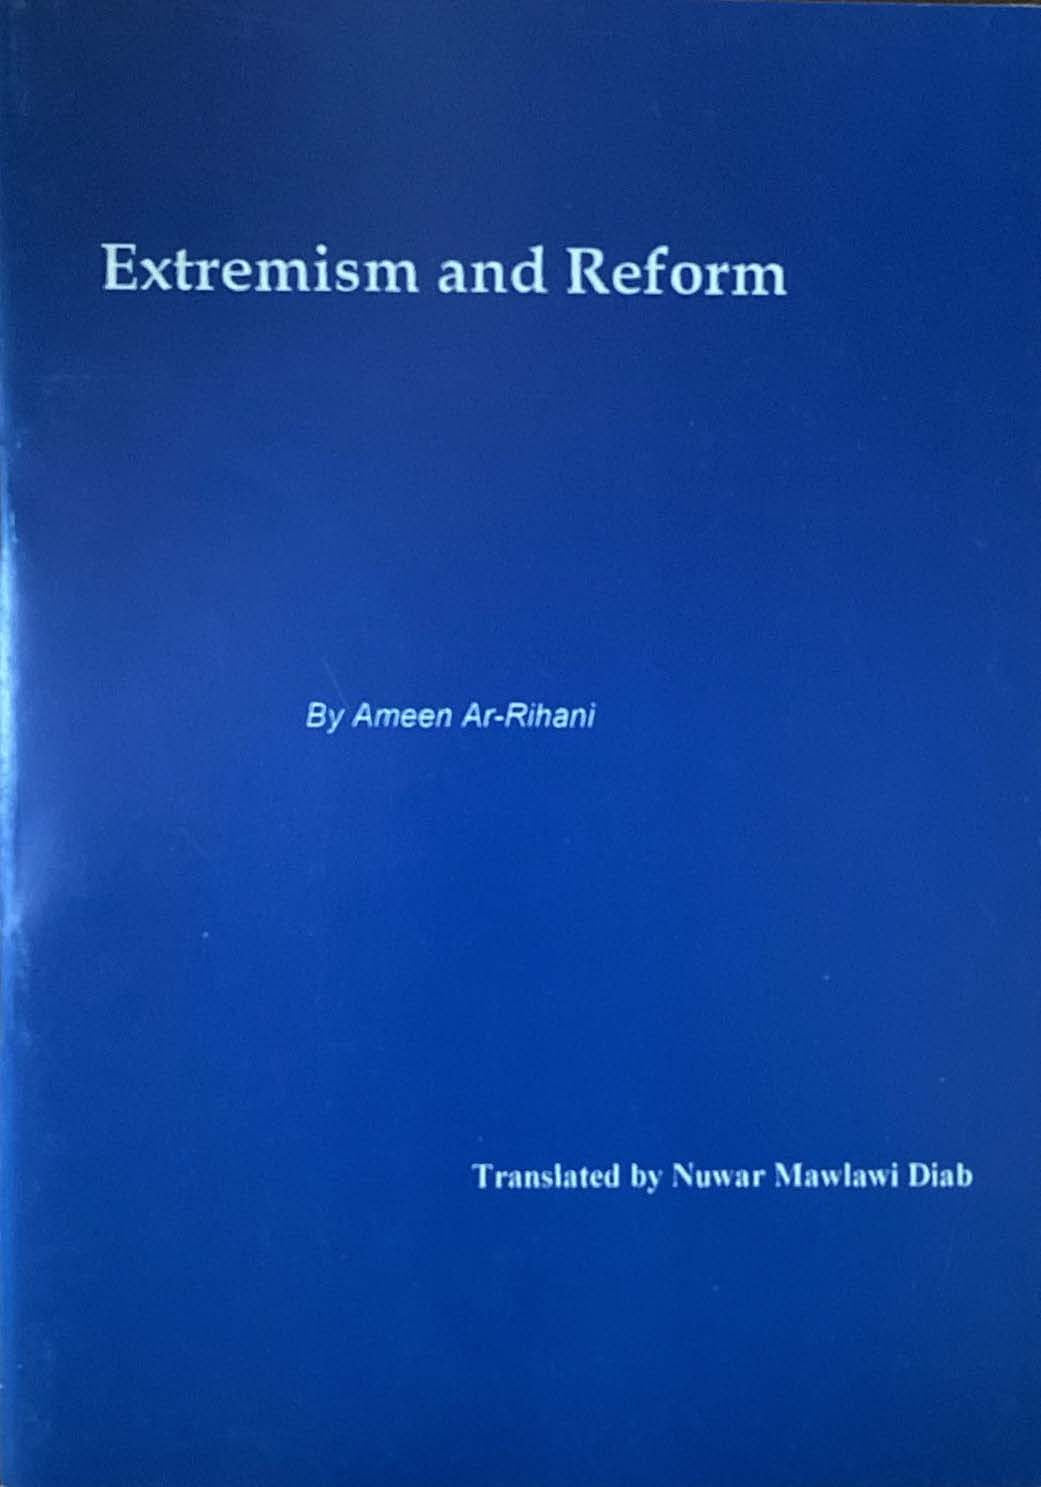 Extremism and Reform